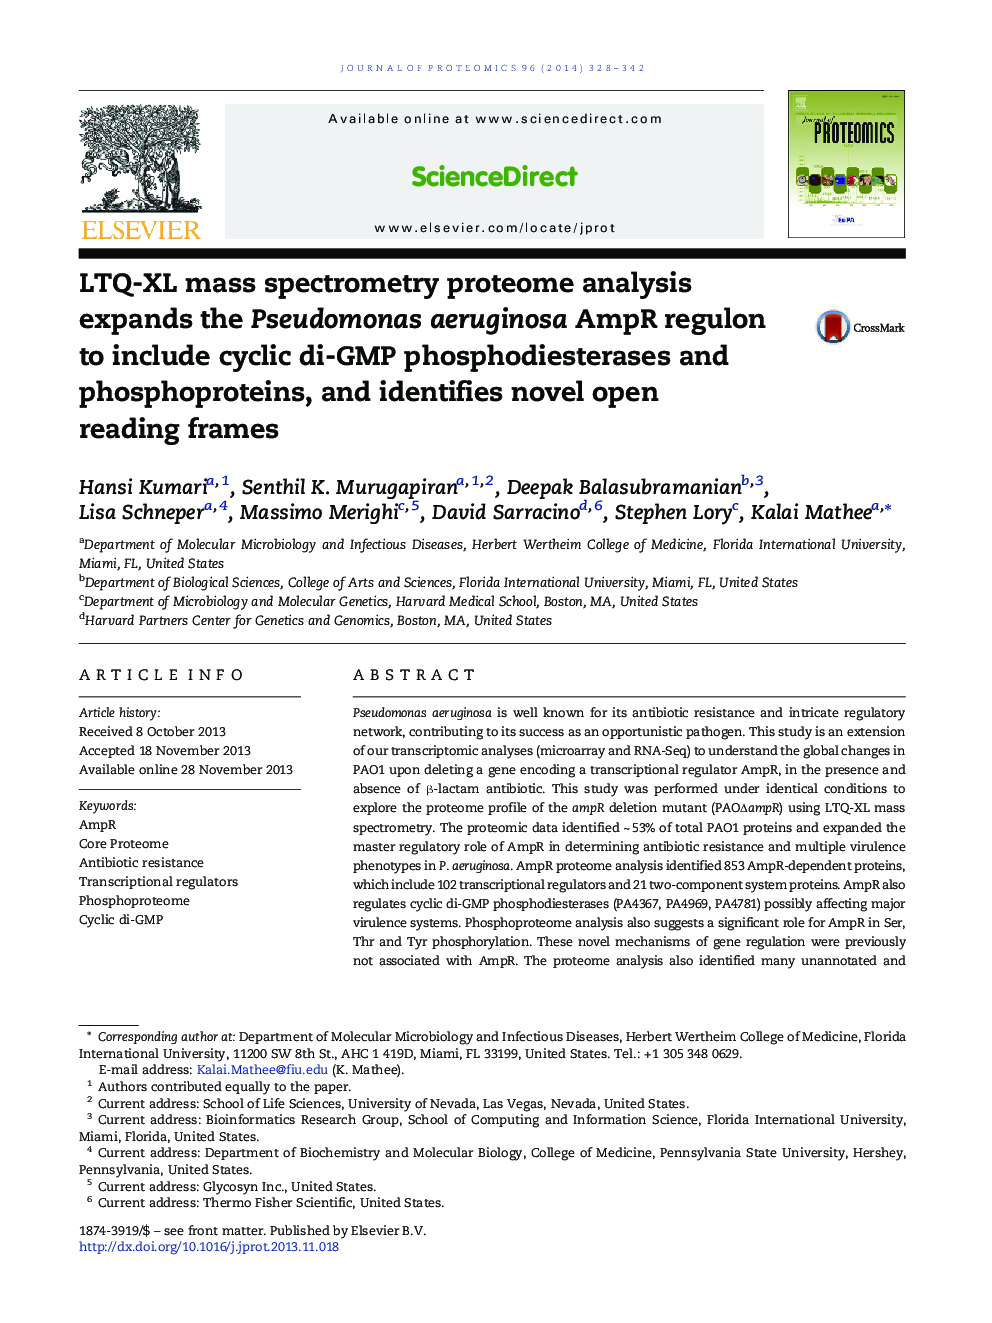 LTQ-XL mass spectrometry proteome analysis expands the Pseudomonas aeruginosa AmpR regulon to include cyclic di-GMP phosphodiesterases and phosphoproteins, and identifies novel open reading frames